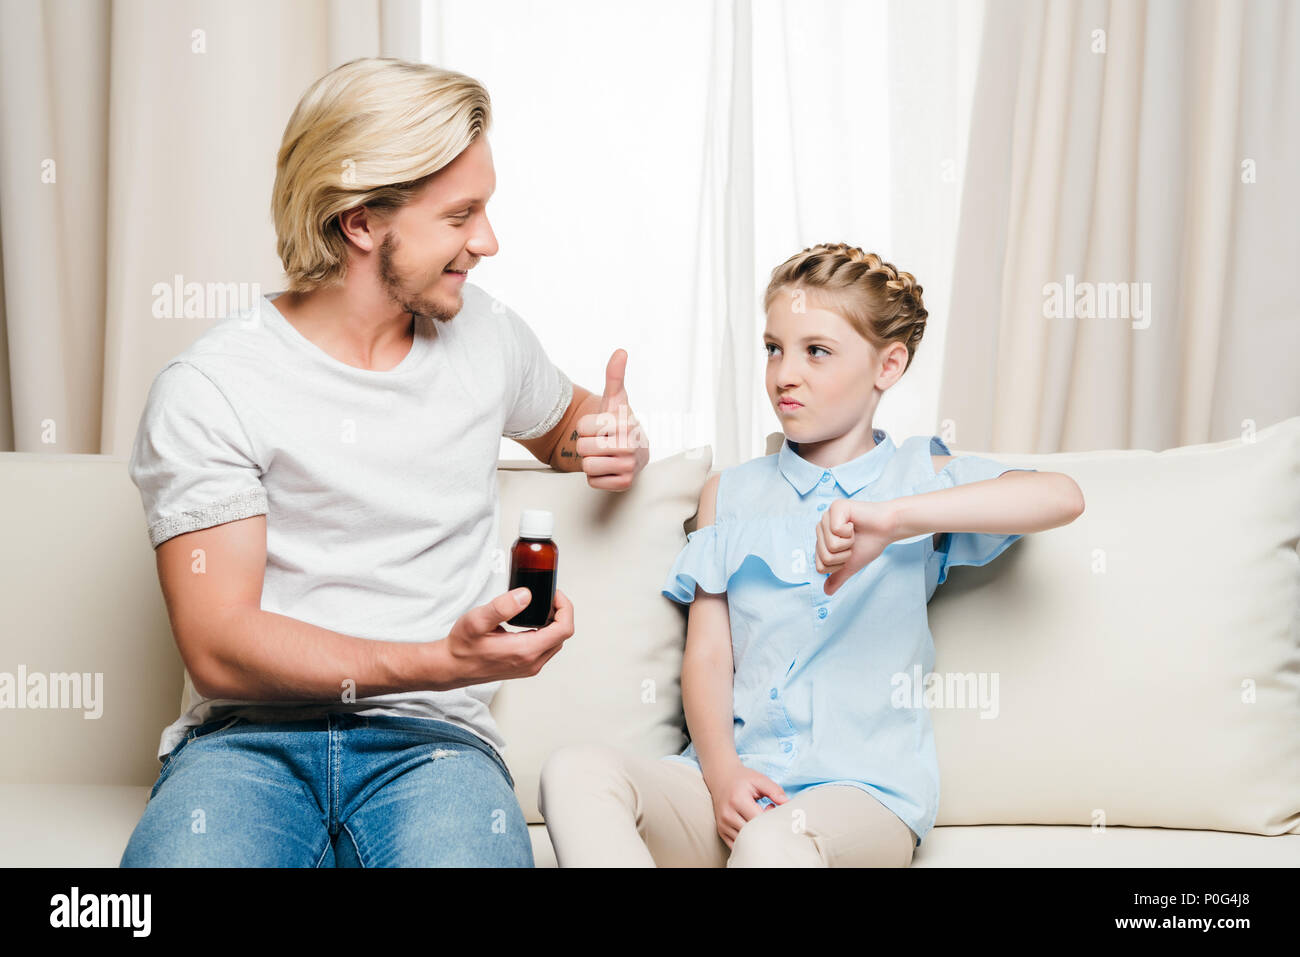 Smiling father holding medicine and showing thumb up while daughter showing thumb down Stock Photo